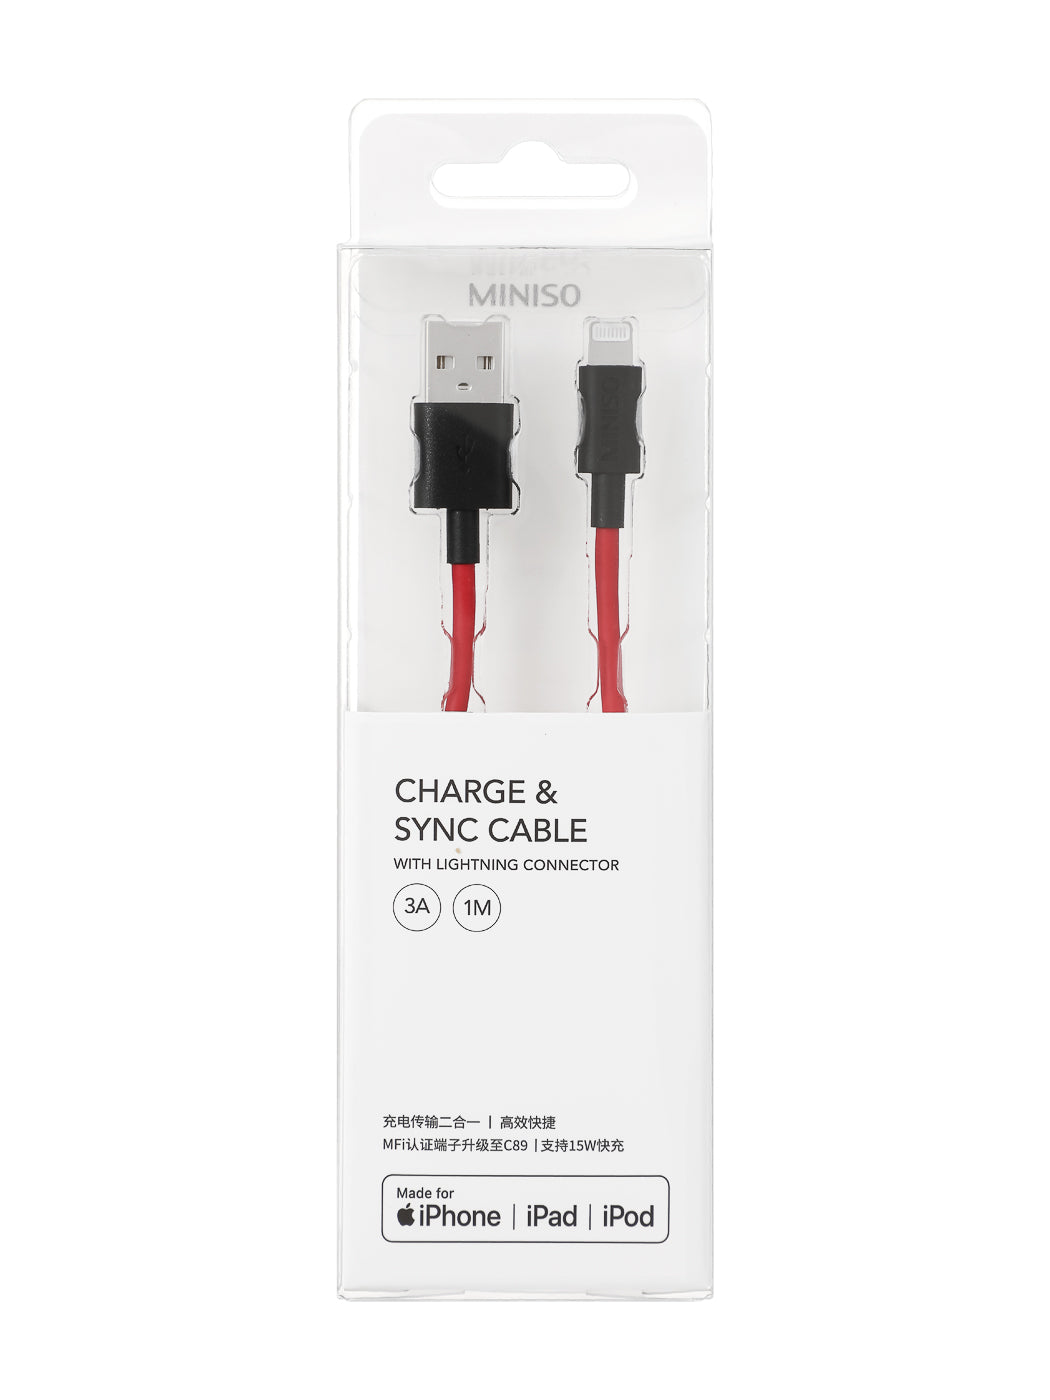 MINISO 1M FAST CHARGE CHARGE & SYNC CABLE WITH LIGHTNING CONNECTOR (RED) 2010251510102 CHARGING CABLE WITH LIGHTNING CONNECTOR